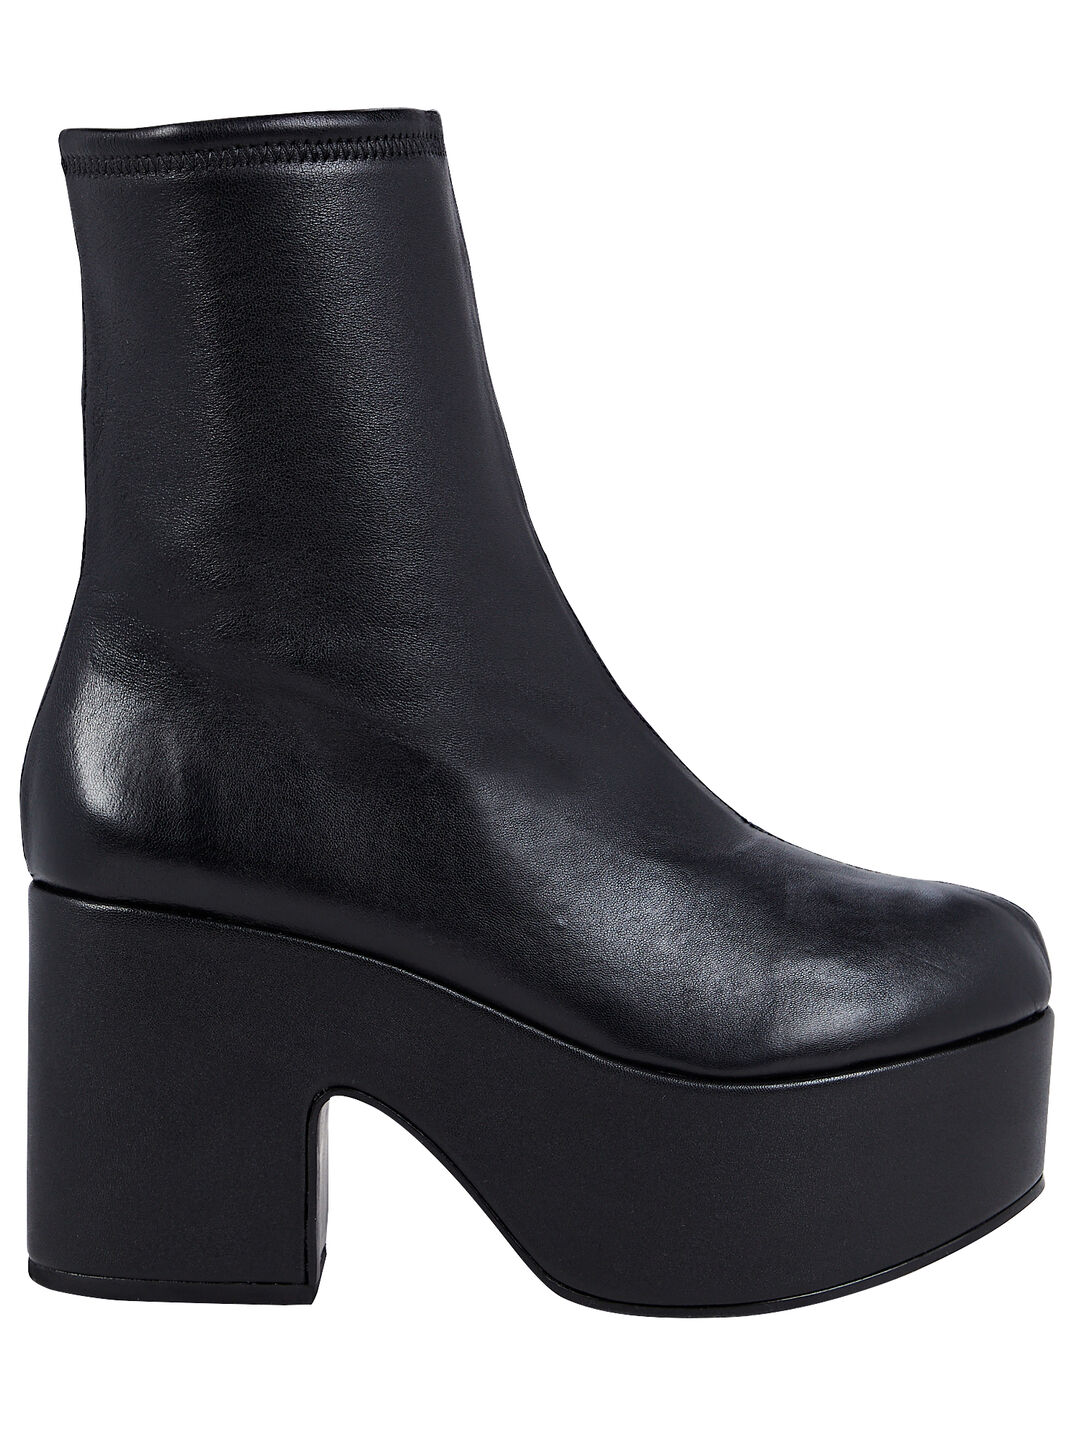 Miso Leather Platform Ankle Boots